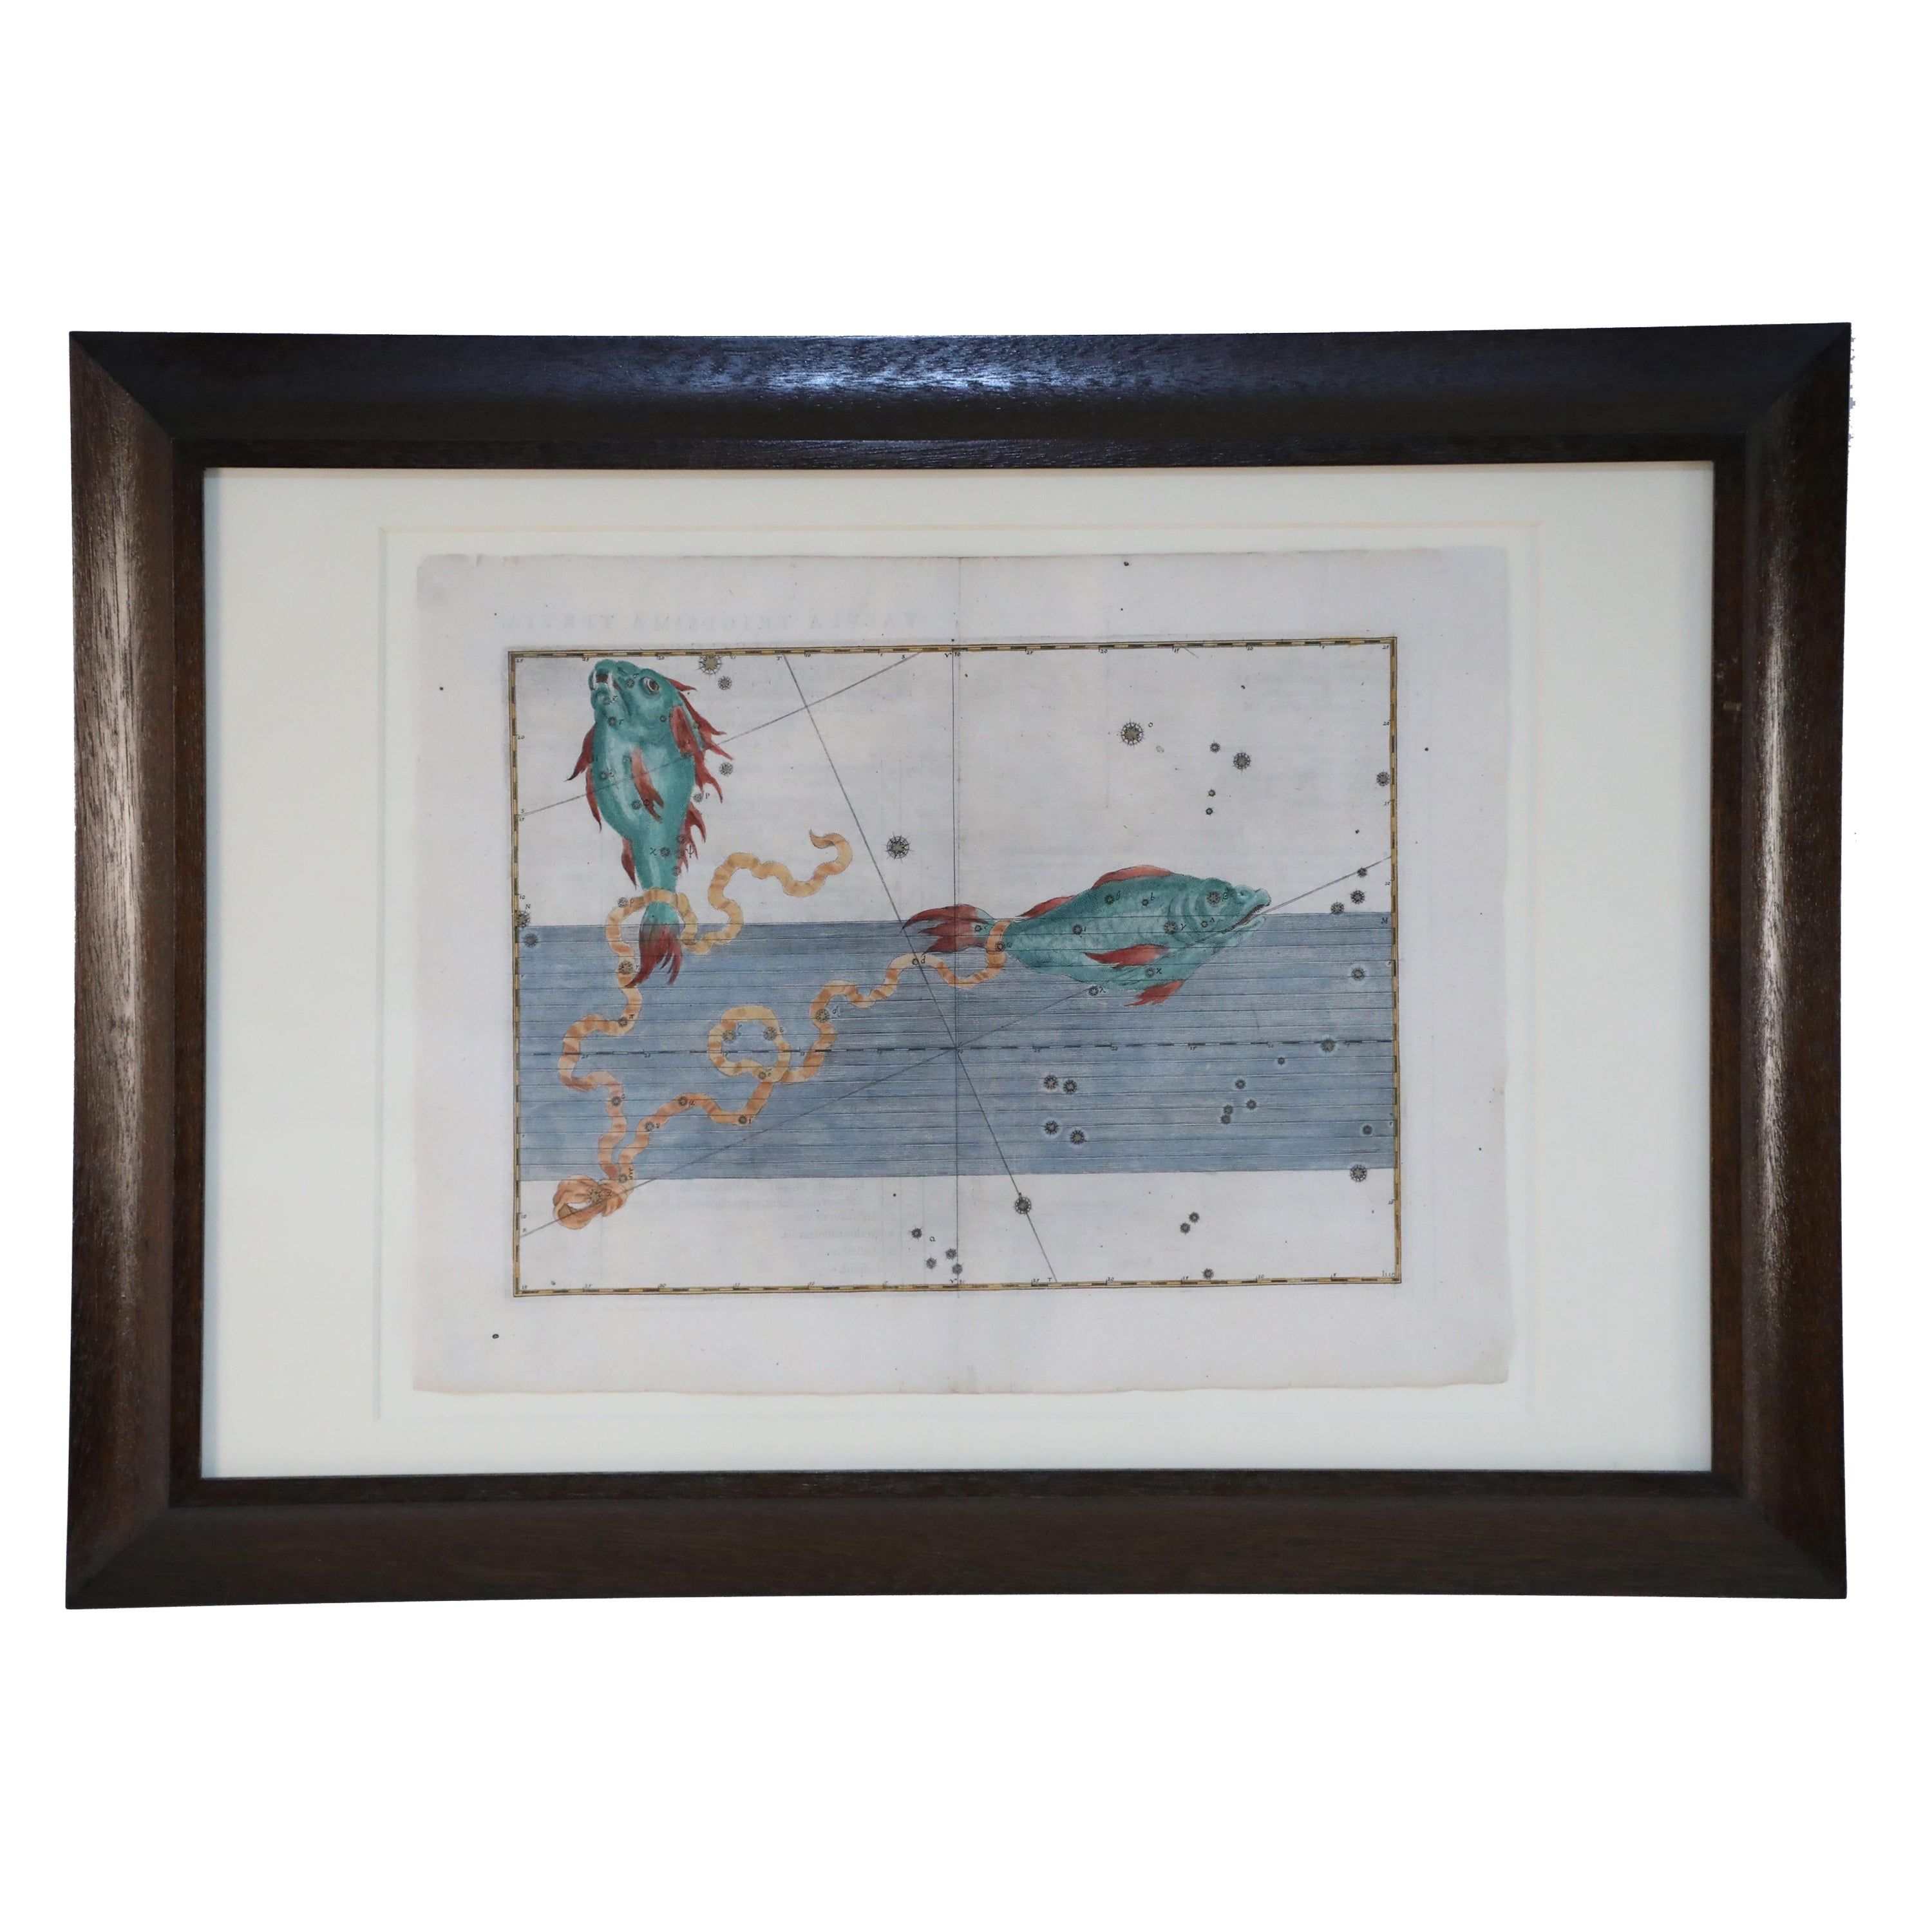 Alexander Mair Renaissance Hand-Colored Engravings of Astronomy Star Charts